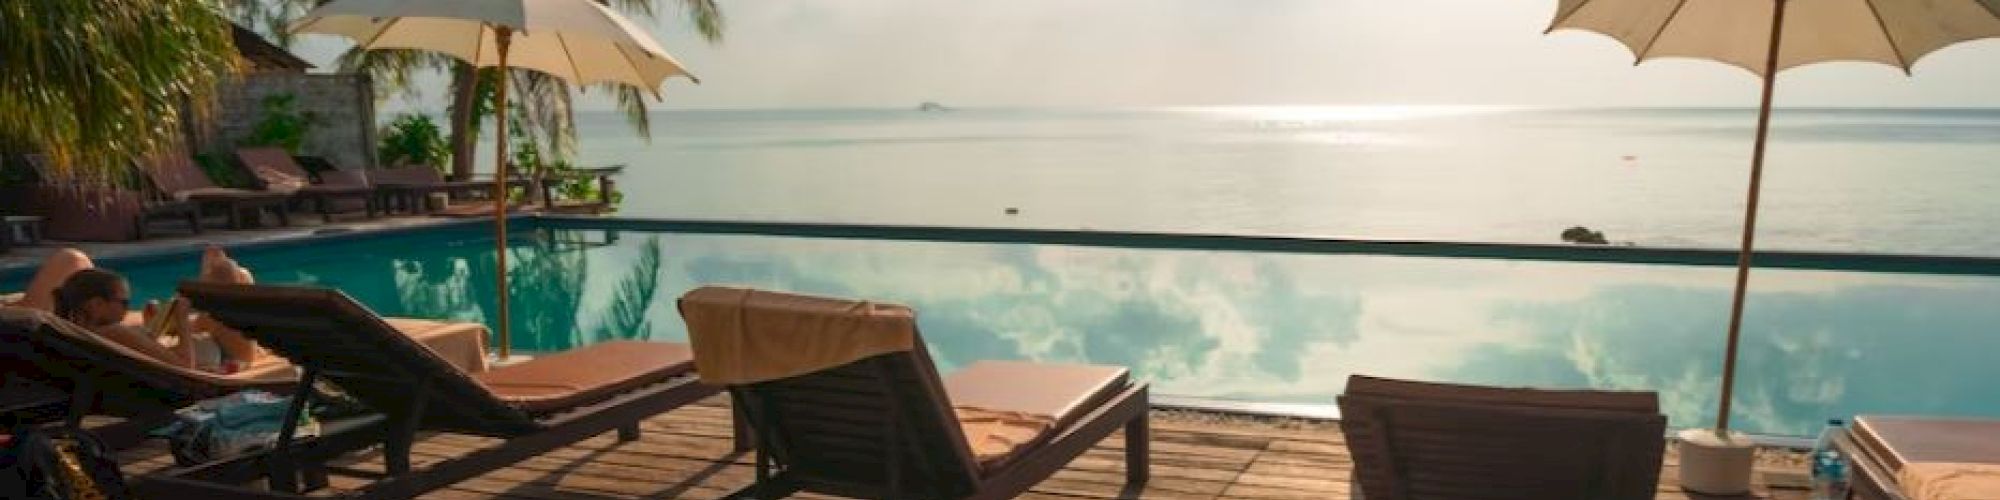 The image shows a serene poolside with lounge chairs, umbrellas, and an infinity pool overlooking a calm sea, under a partly cloudy sky.